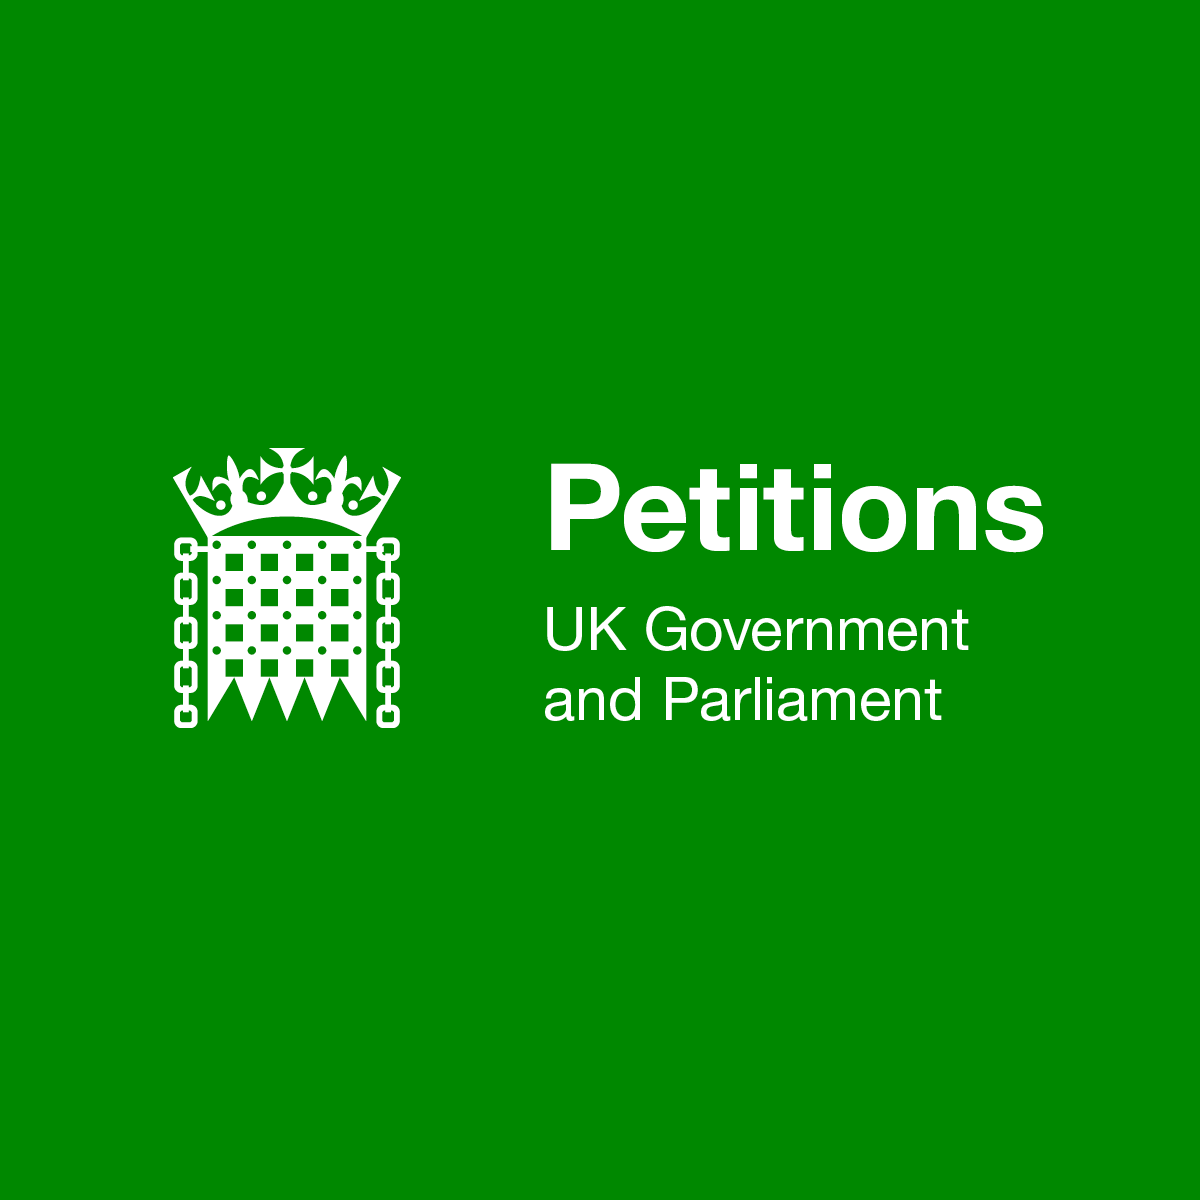 Make all forms of 'geo-engineering' affecting the environment illegal - Petitions